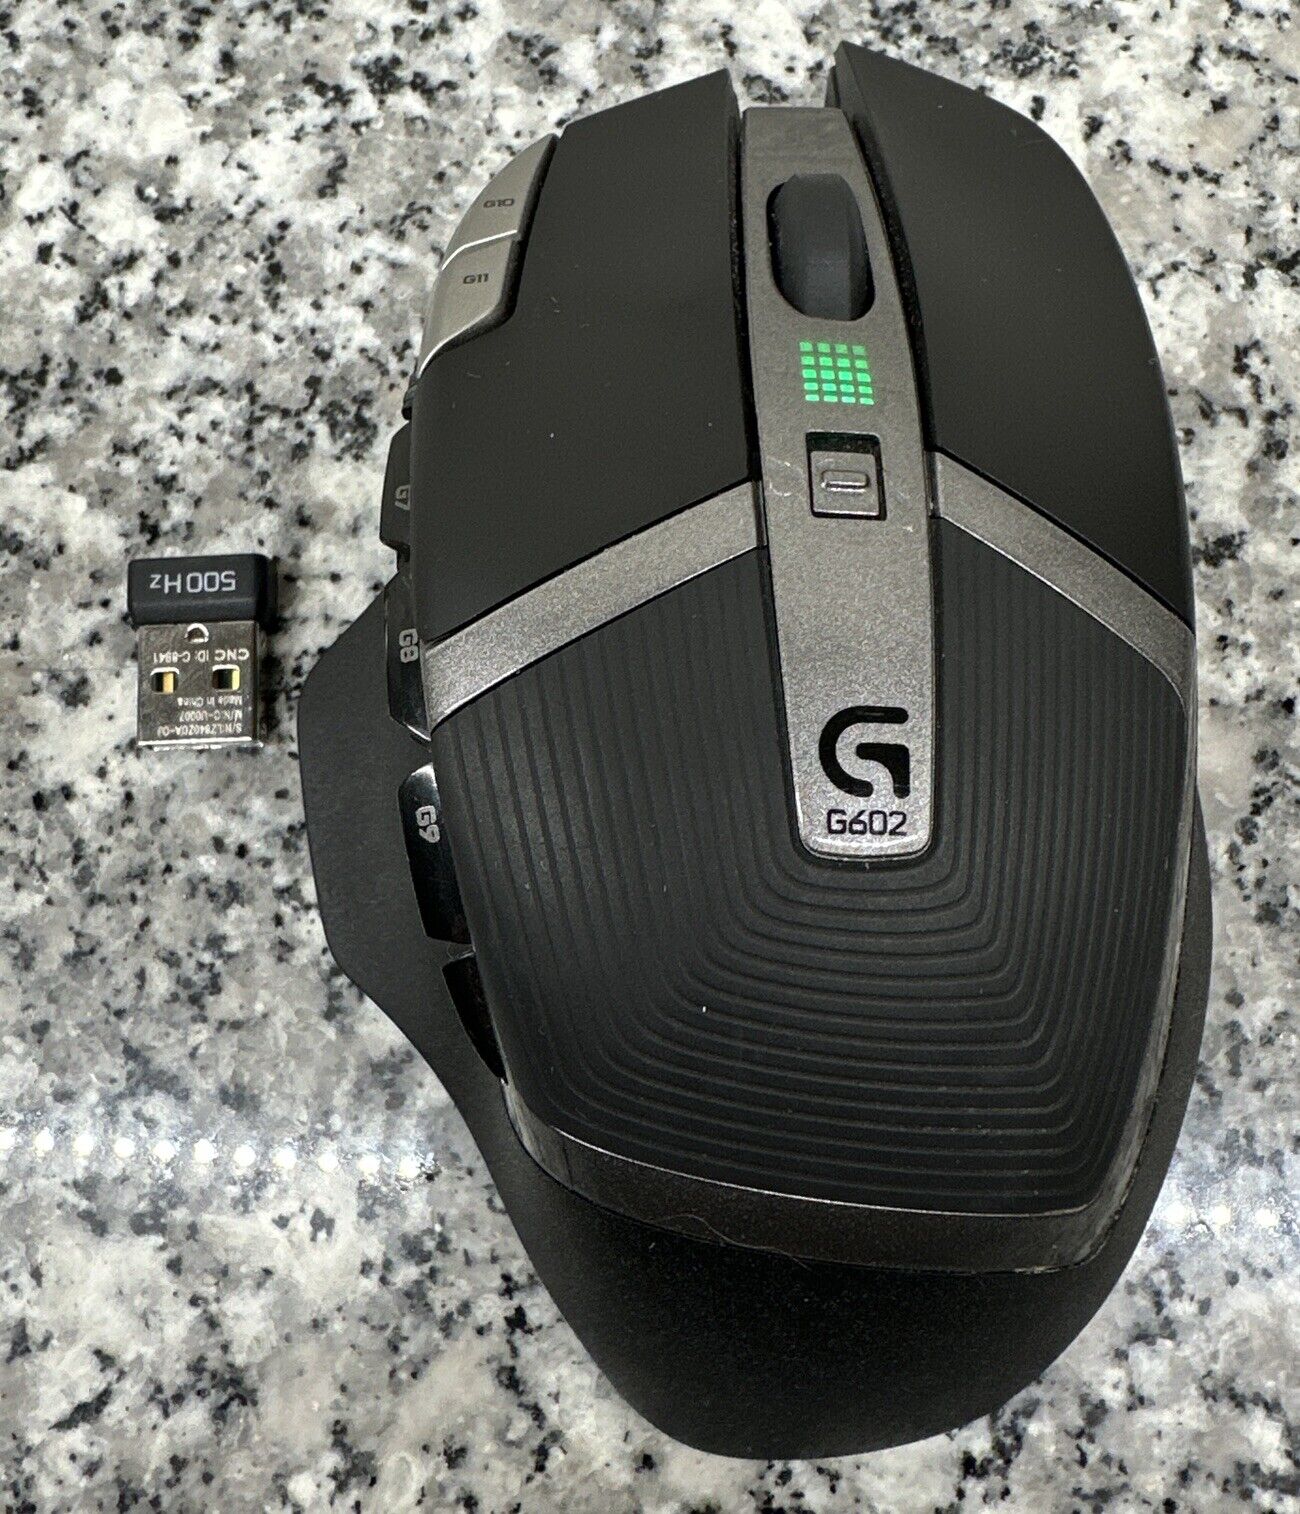 Logitech G602 Wireless Gaming Mouse + 500Mhz USB Reciever Tested WORKS